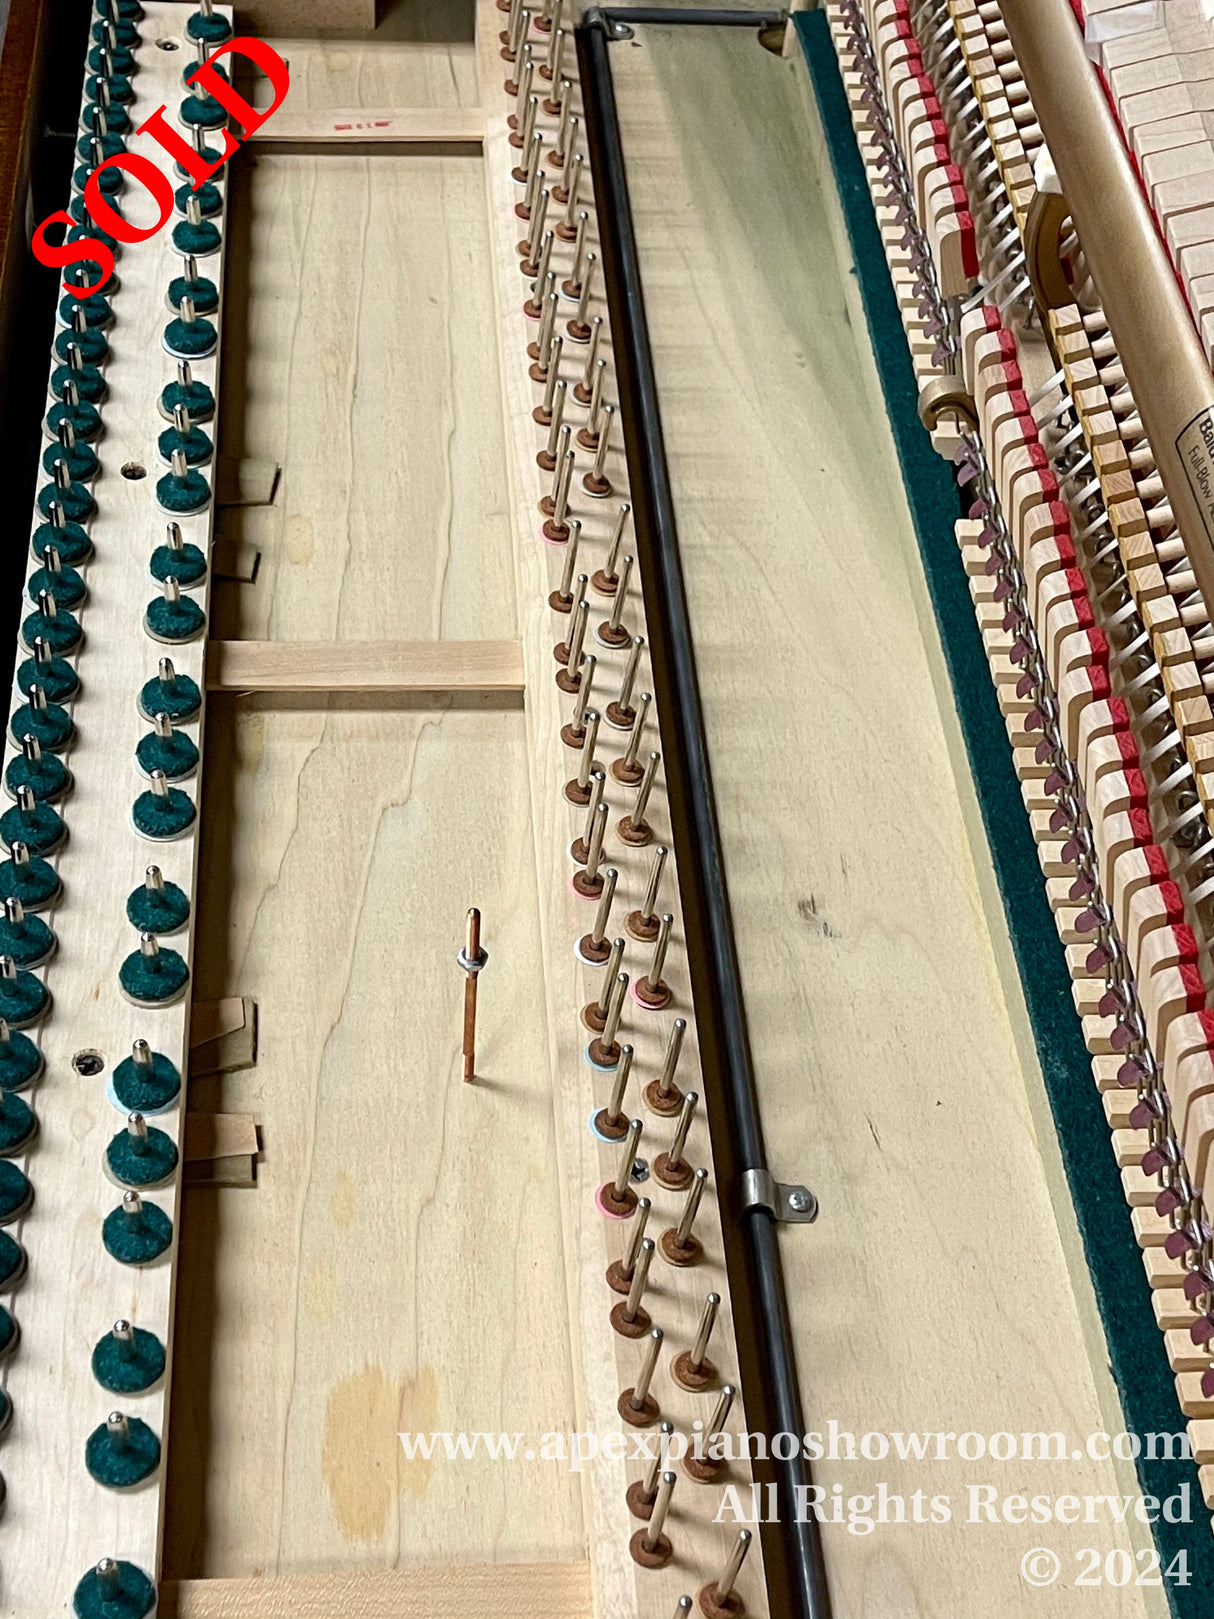 Interior view of a grand piano showcasing the hammer mechanism and strings, with felt dampers and tuning pins visible, during maintenance or refurbishment.